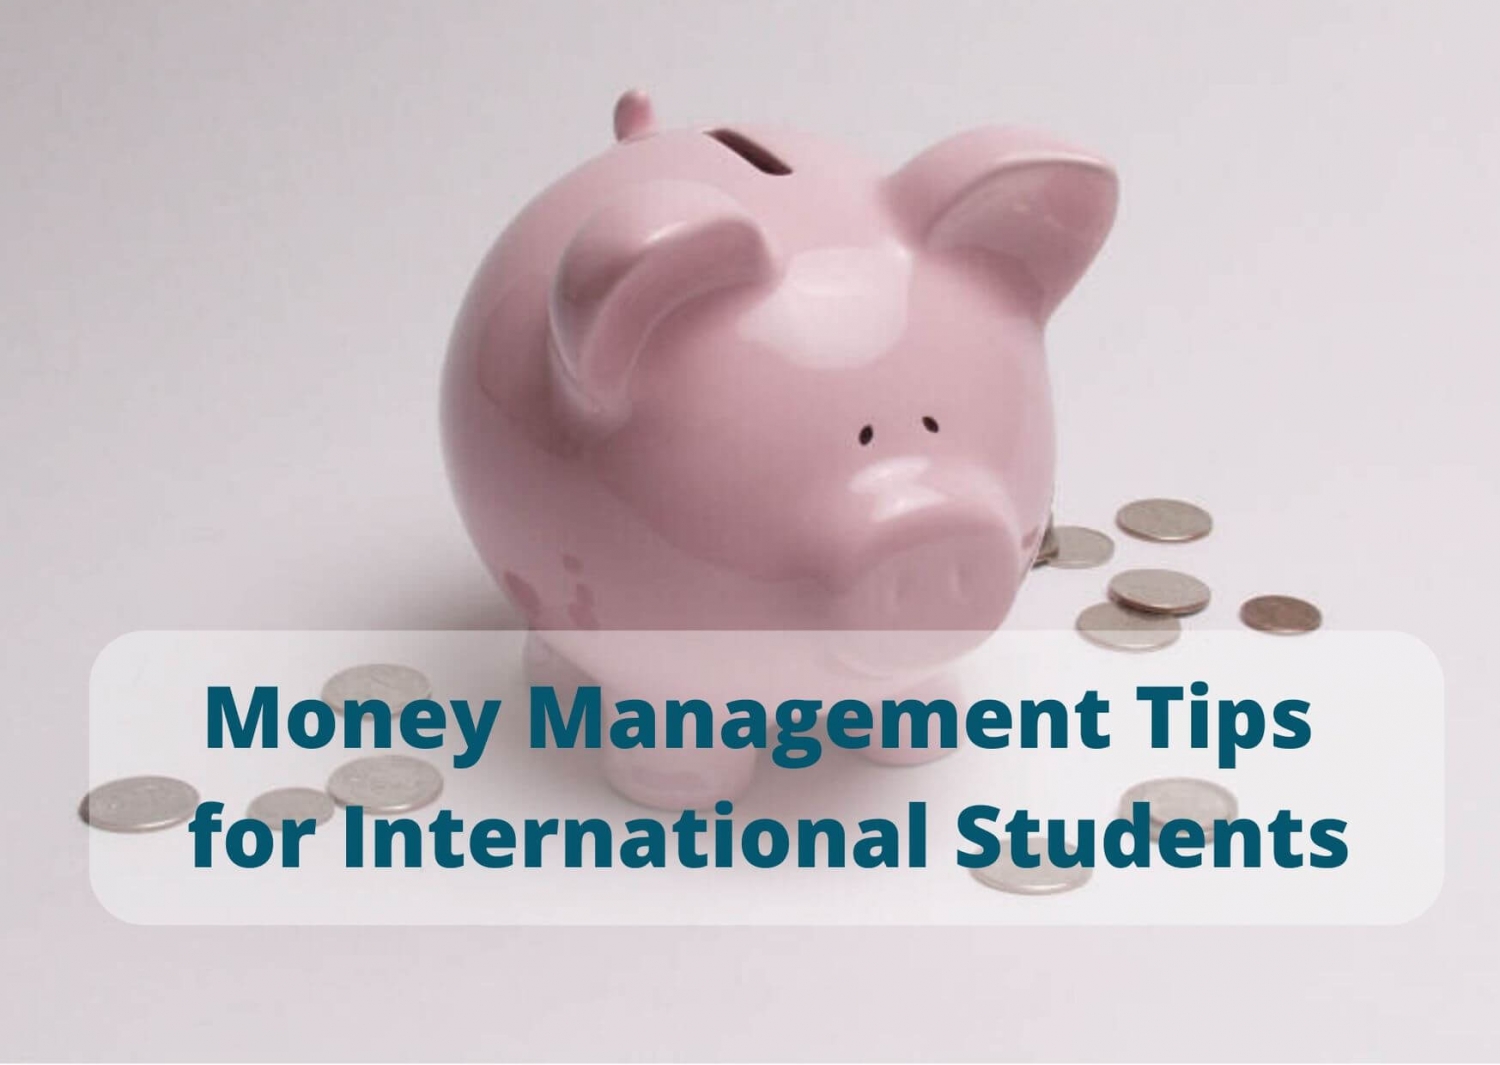 Financial Management Tips for International Students